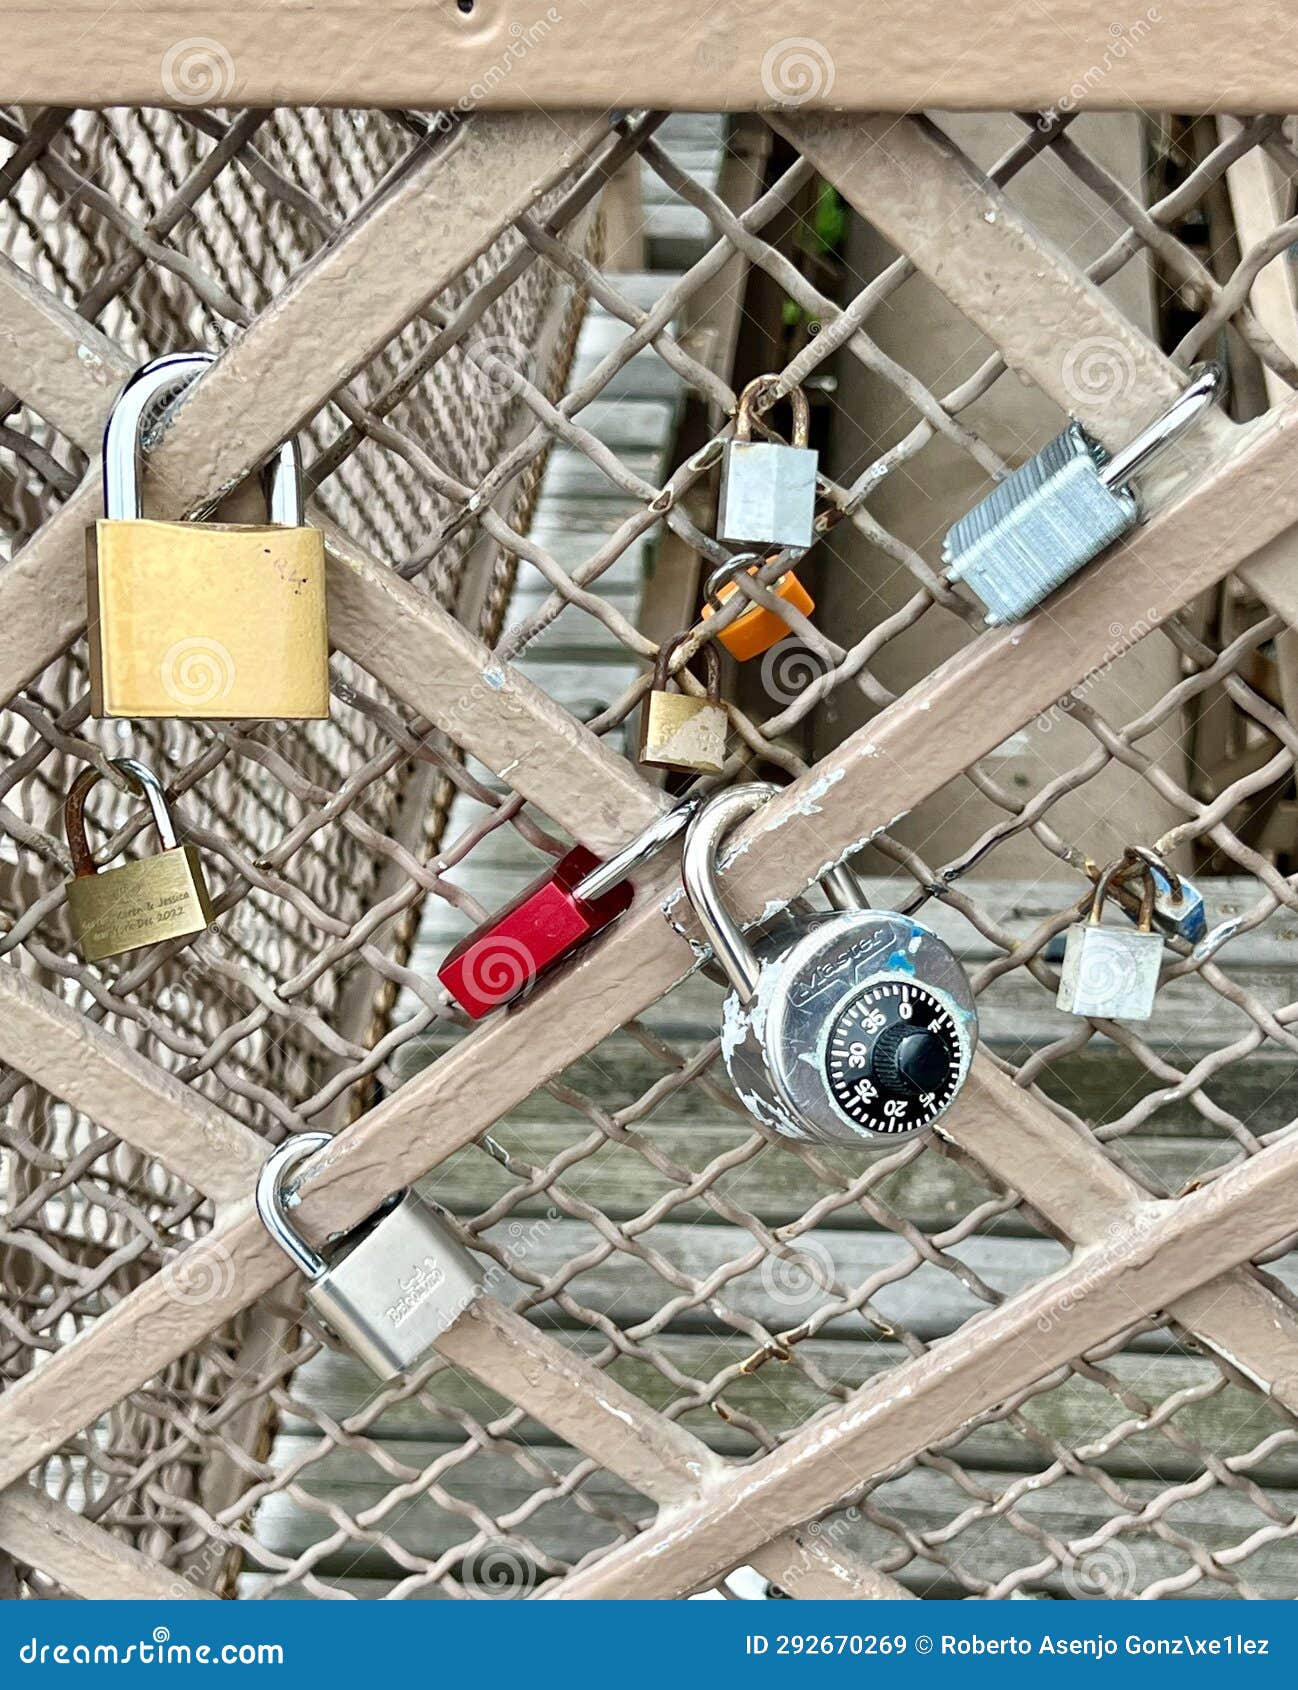 picture of a gate with padlocks on the brooklyn bridge